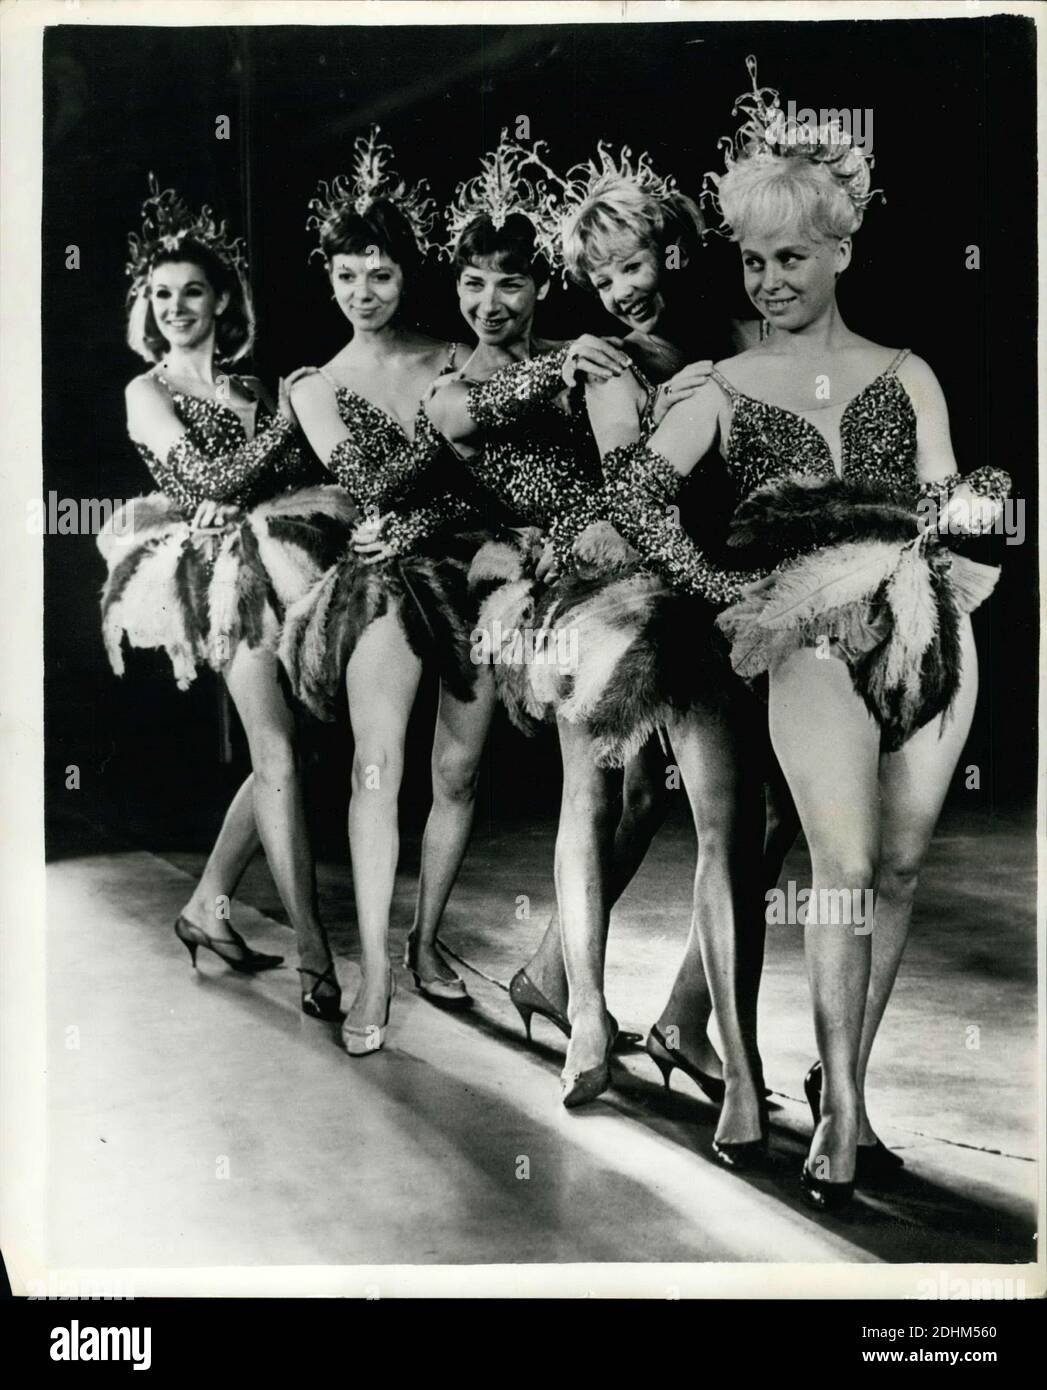 Jul. 06, 1964 - Actresses turn chorus girls for big charity show at the London Palladium: Famous actresses turned chorus girls at the London Palladium yesterday for the first rehearsals of this year's Night of 100 stars'' which will be held at midnight on July 23 in aid of theatrical charities. All the stars are doing acts far removed from their normal performances. Photo shows the actresses turned chorus girls rehearsing for the show are (L to R) Susan Hampshire, Anna Massey, Miriam Karlin, Hayley Mills, and Barbara Windsor. (Credit Image: © Keystone Pictures USA/ZUMAPRESS.com) Stock Photo